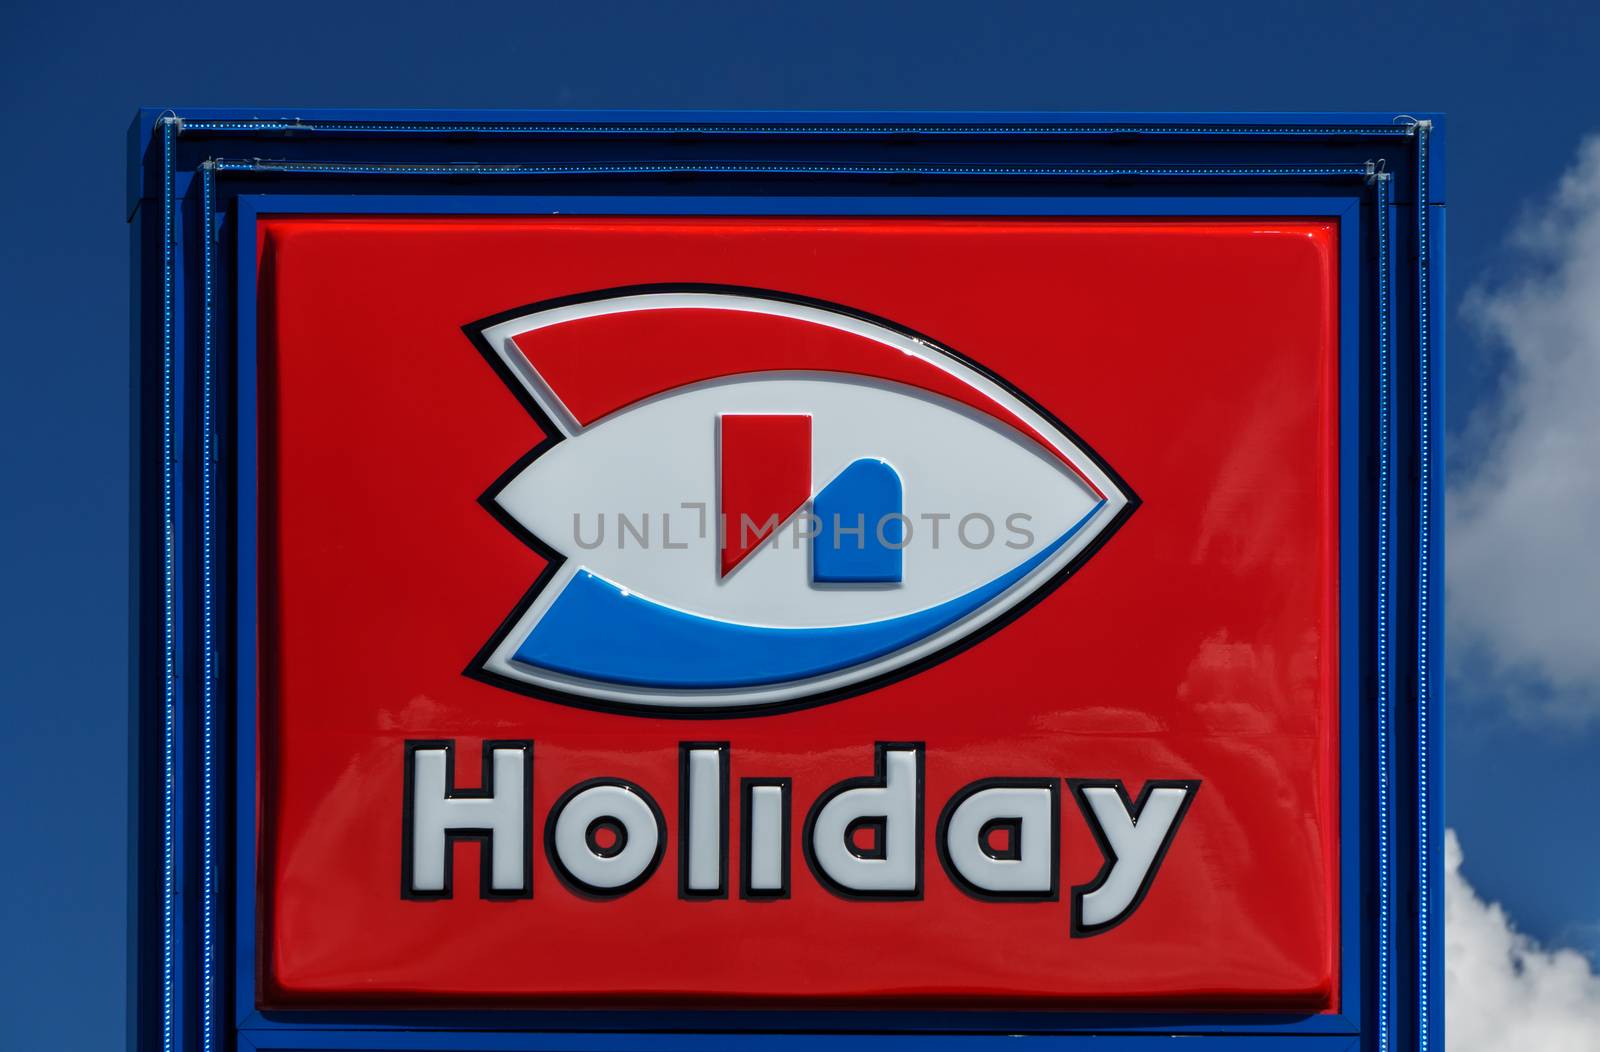 STILLWATER, MN/USA - August 10, 2015: Holiday Station Store sign and logo. Holiday Stationstores is a chain of gasoline and convenience stores in the United States.